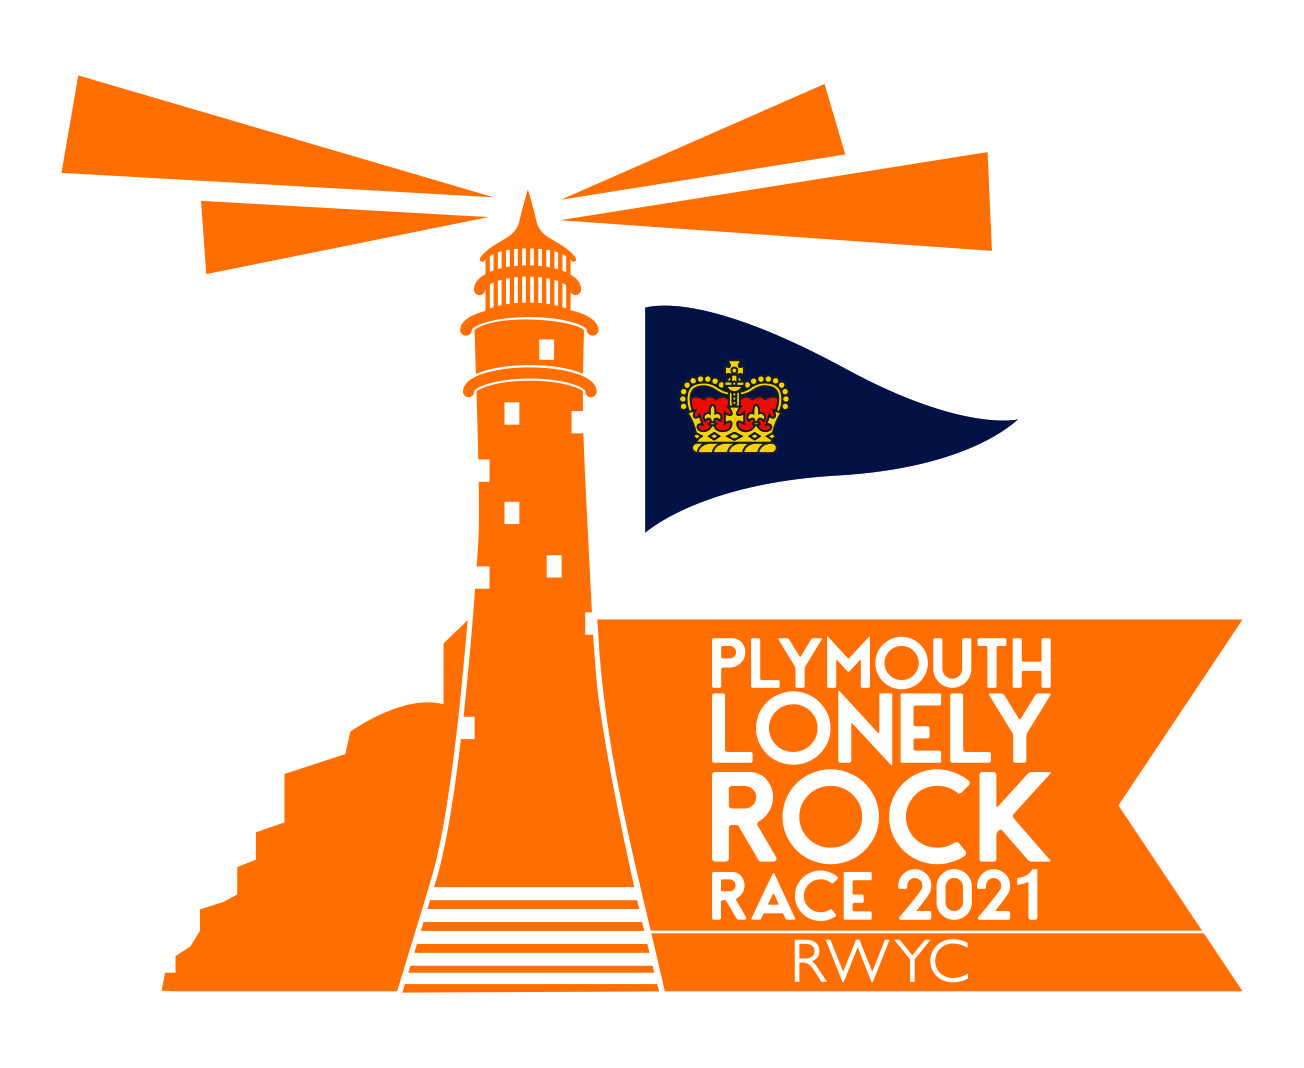 Plymouth Lonely Rock Race 2021 logo